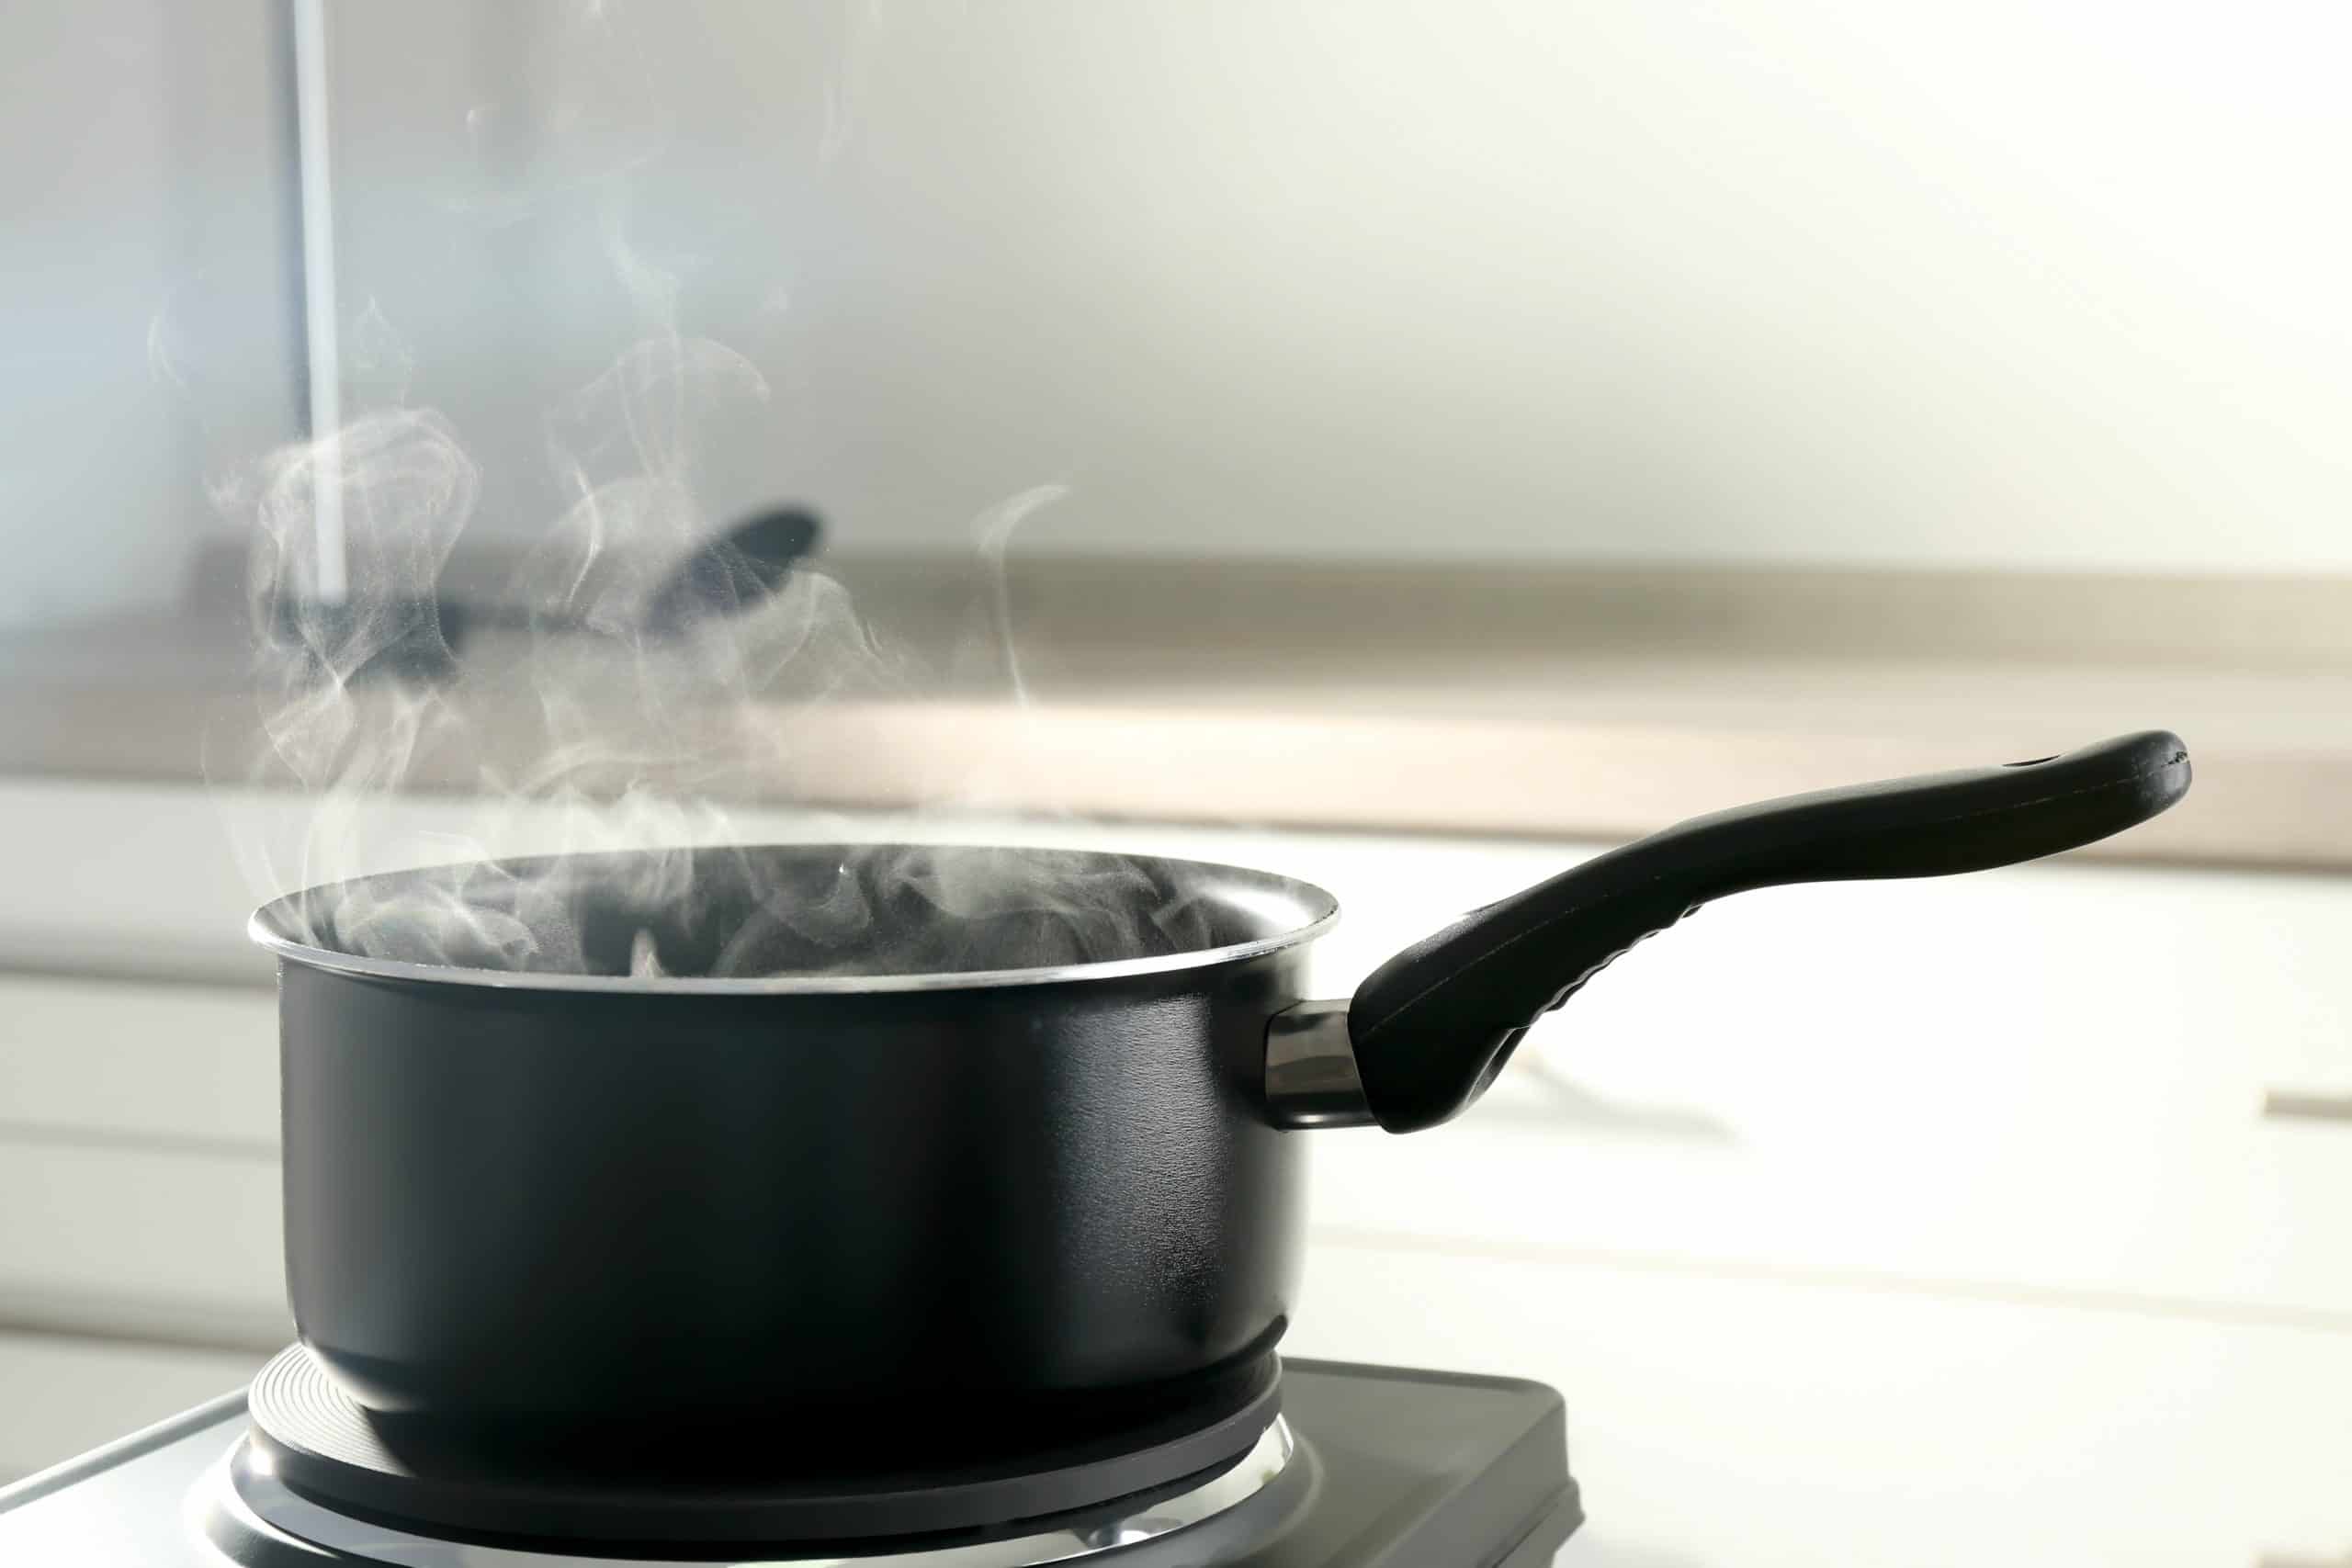 When a Saucepan is placed on the stove, why does the handle become hot?